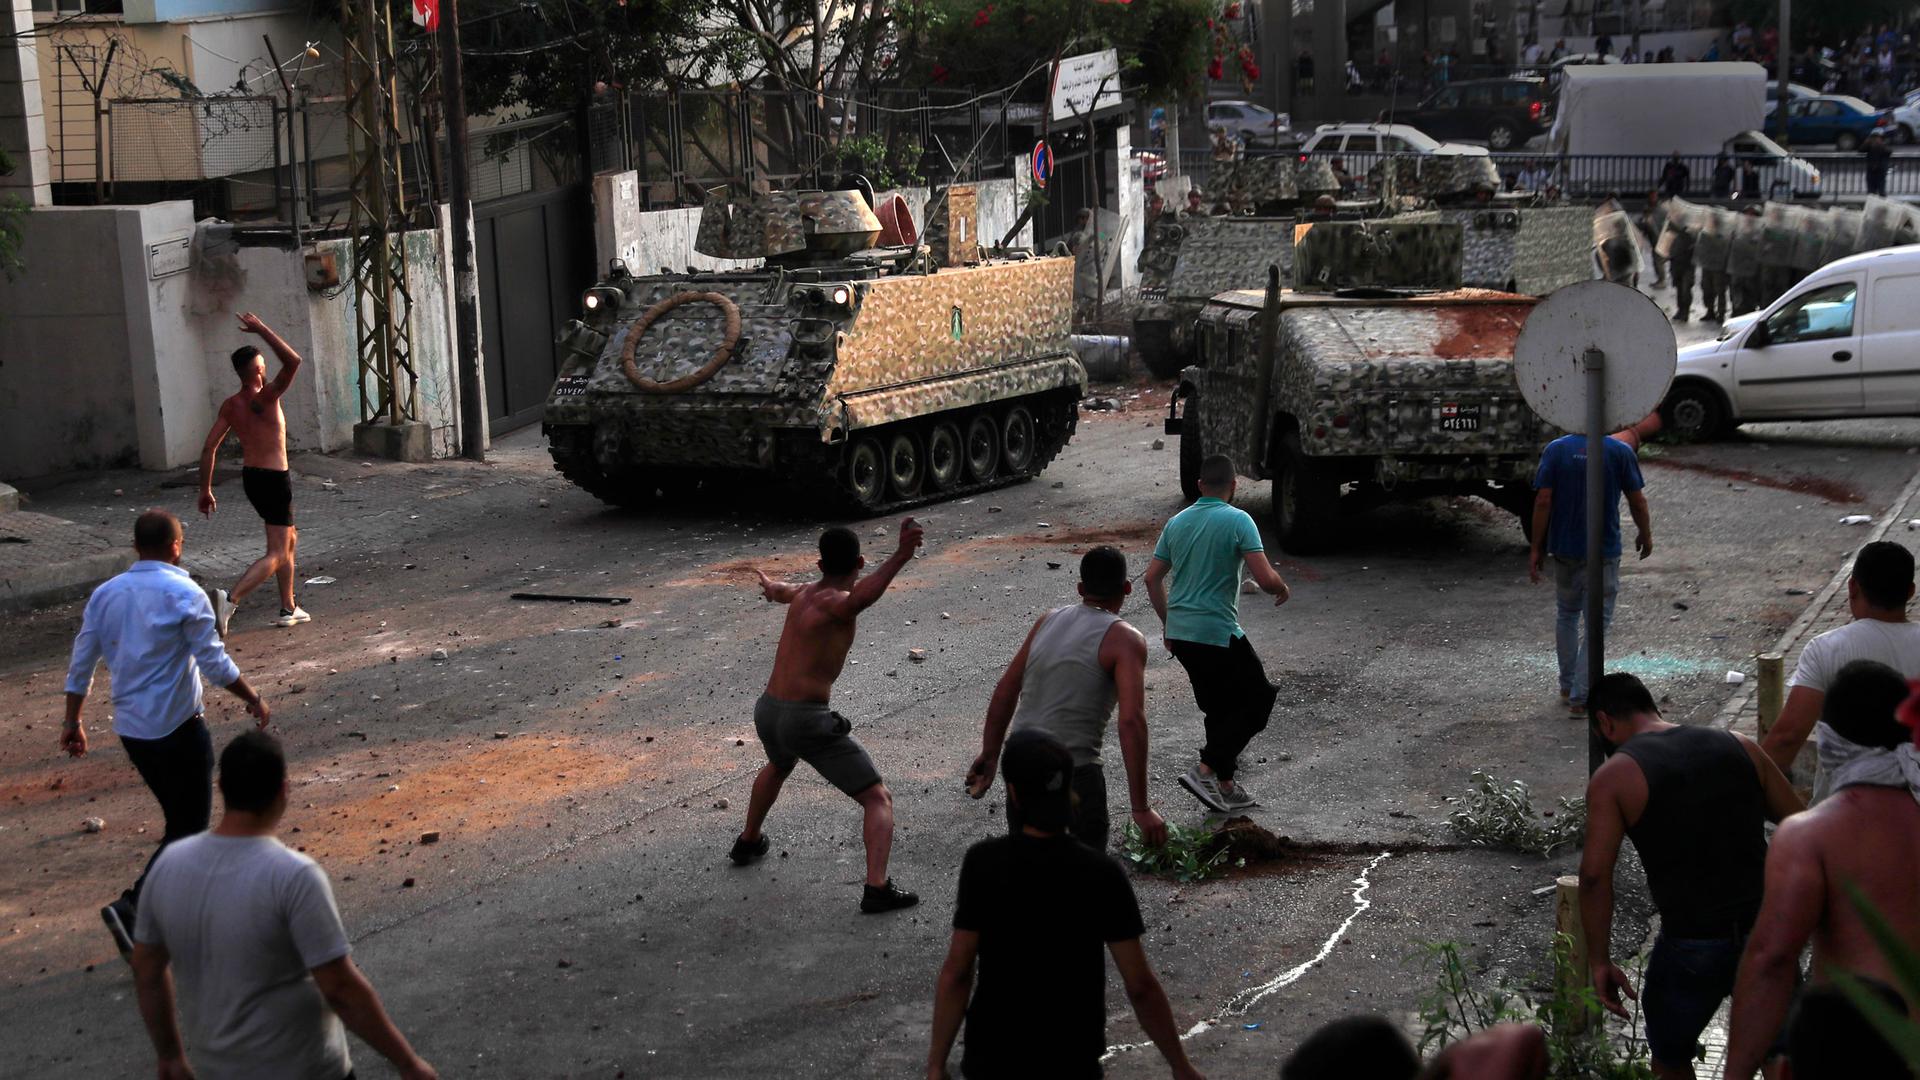 Several people are shown in a street throwing items at a tank and other armored vehicles.